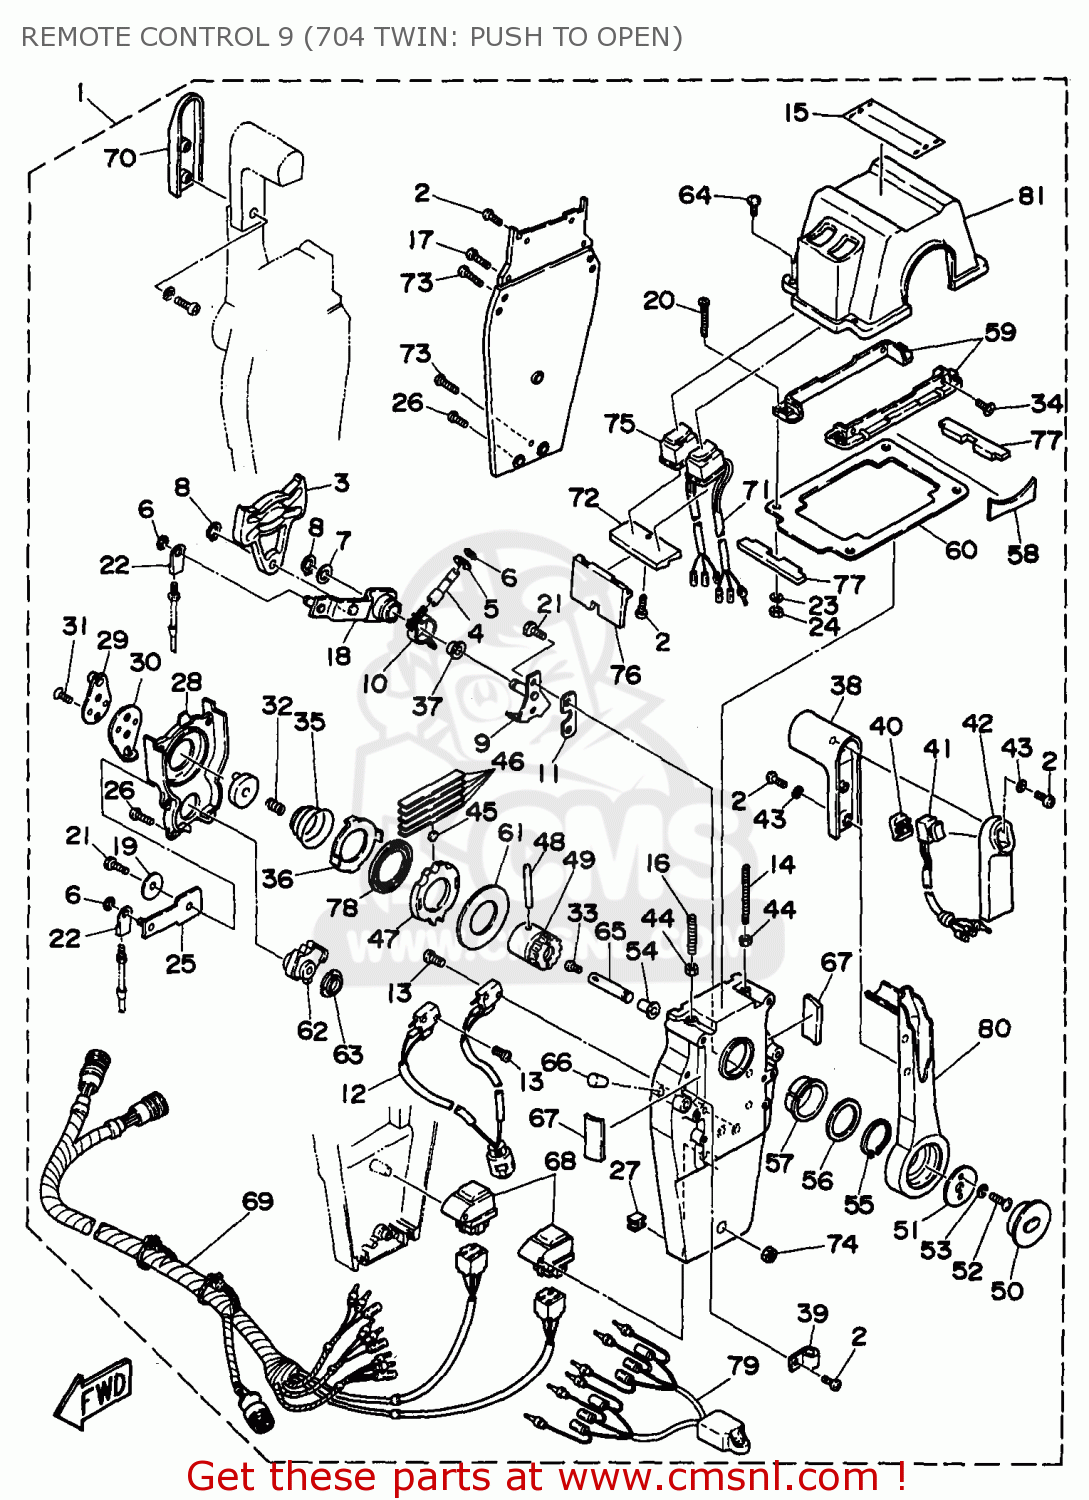 Yamaha 703 Remote Control Wiring Diagram from images.cmsnl.com